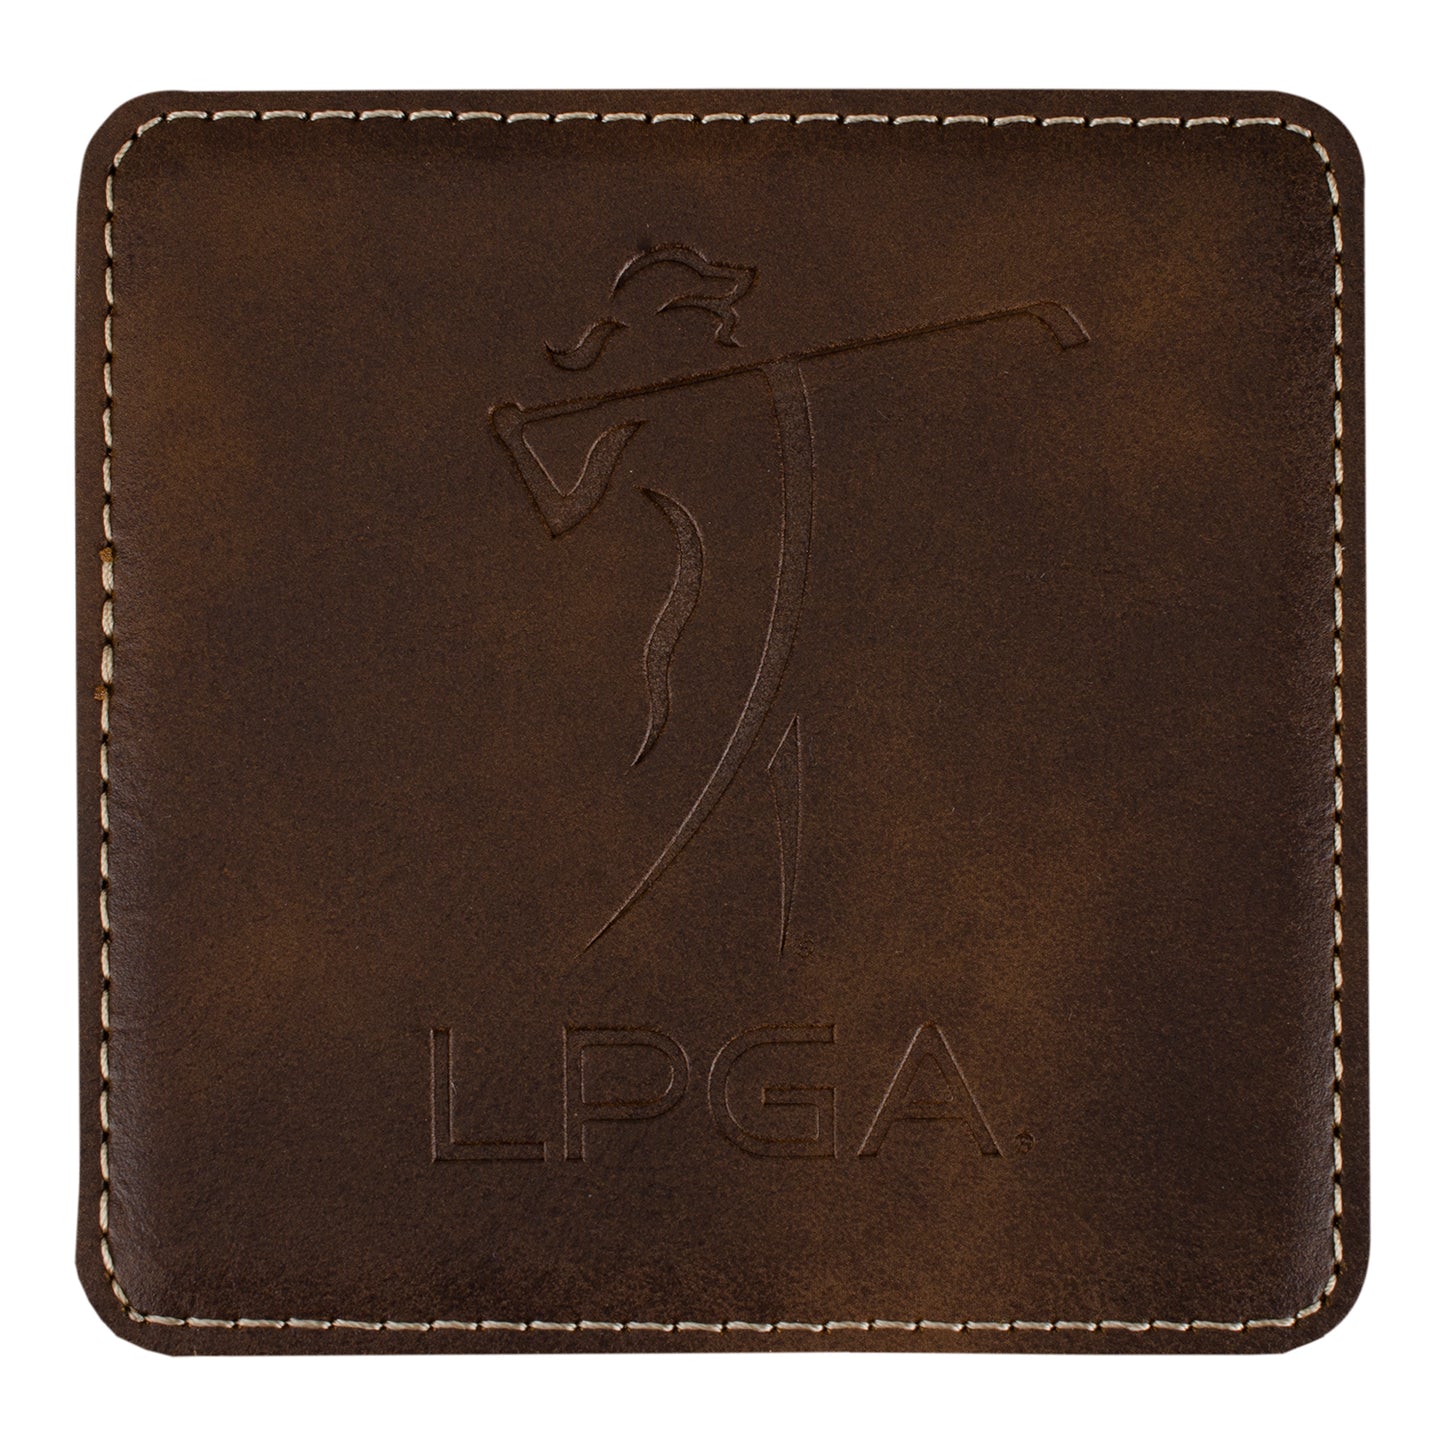 Tournament Solutions LPGA Leather Coaster - Front View